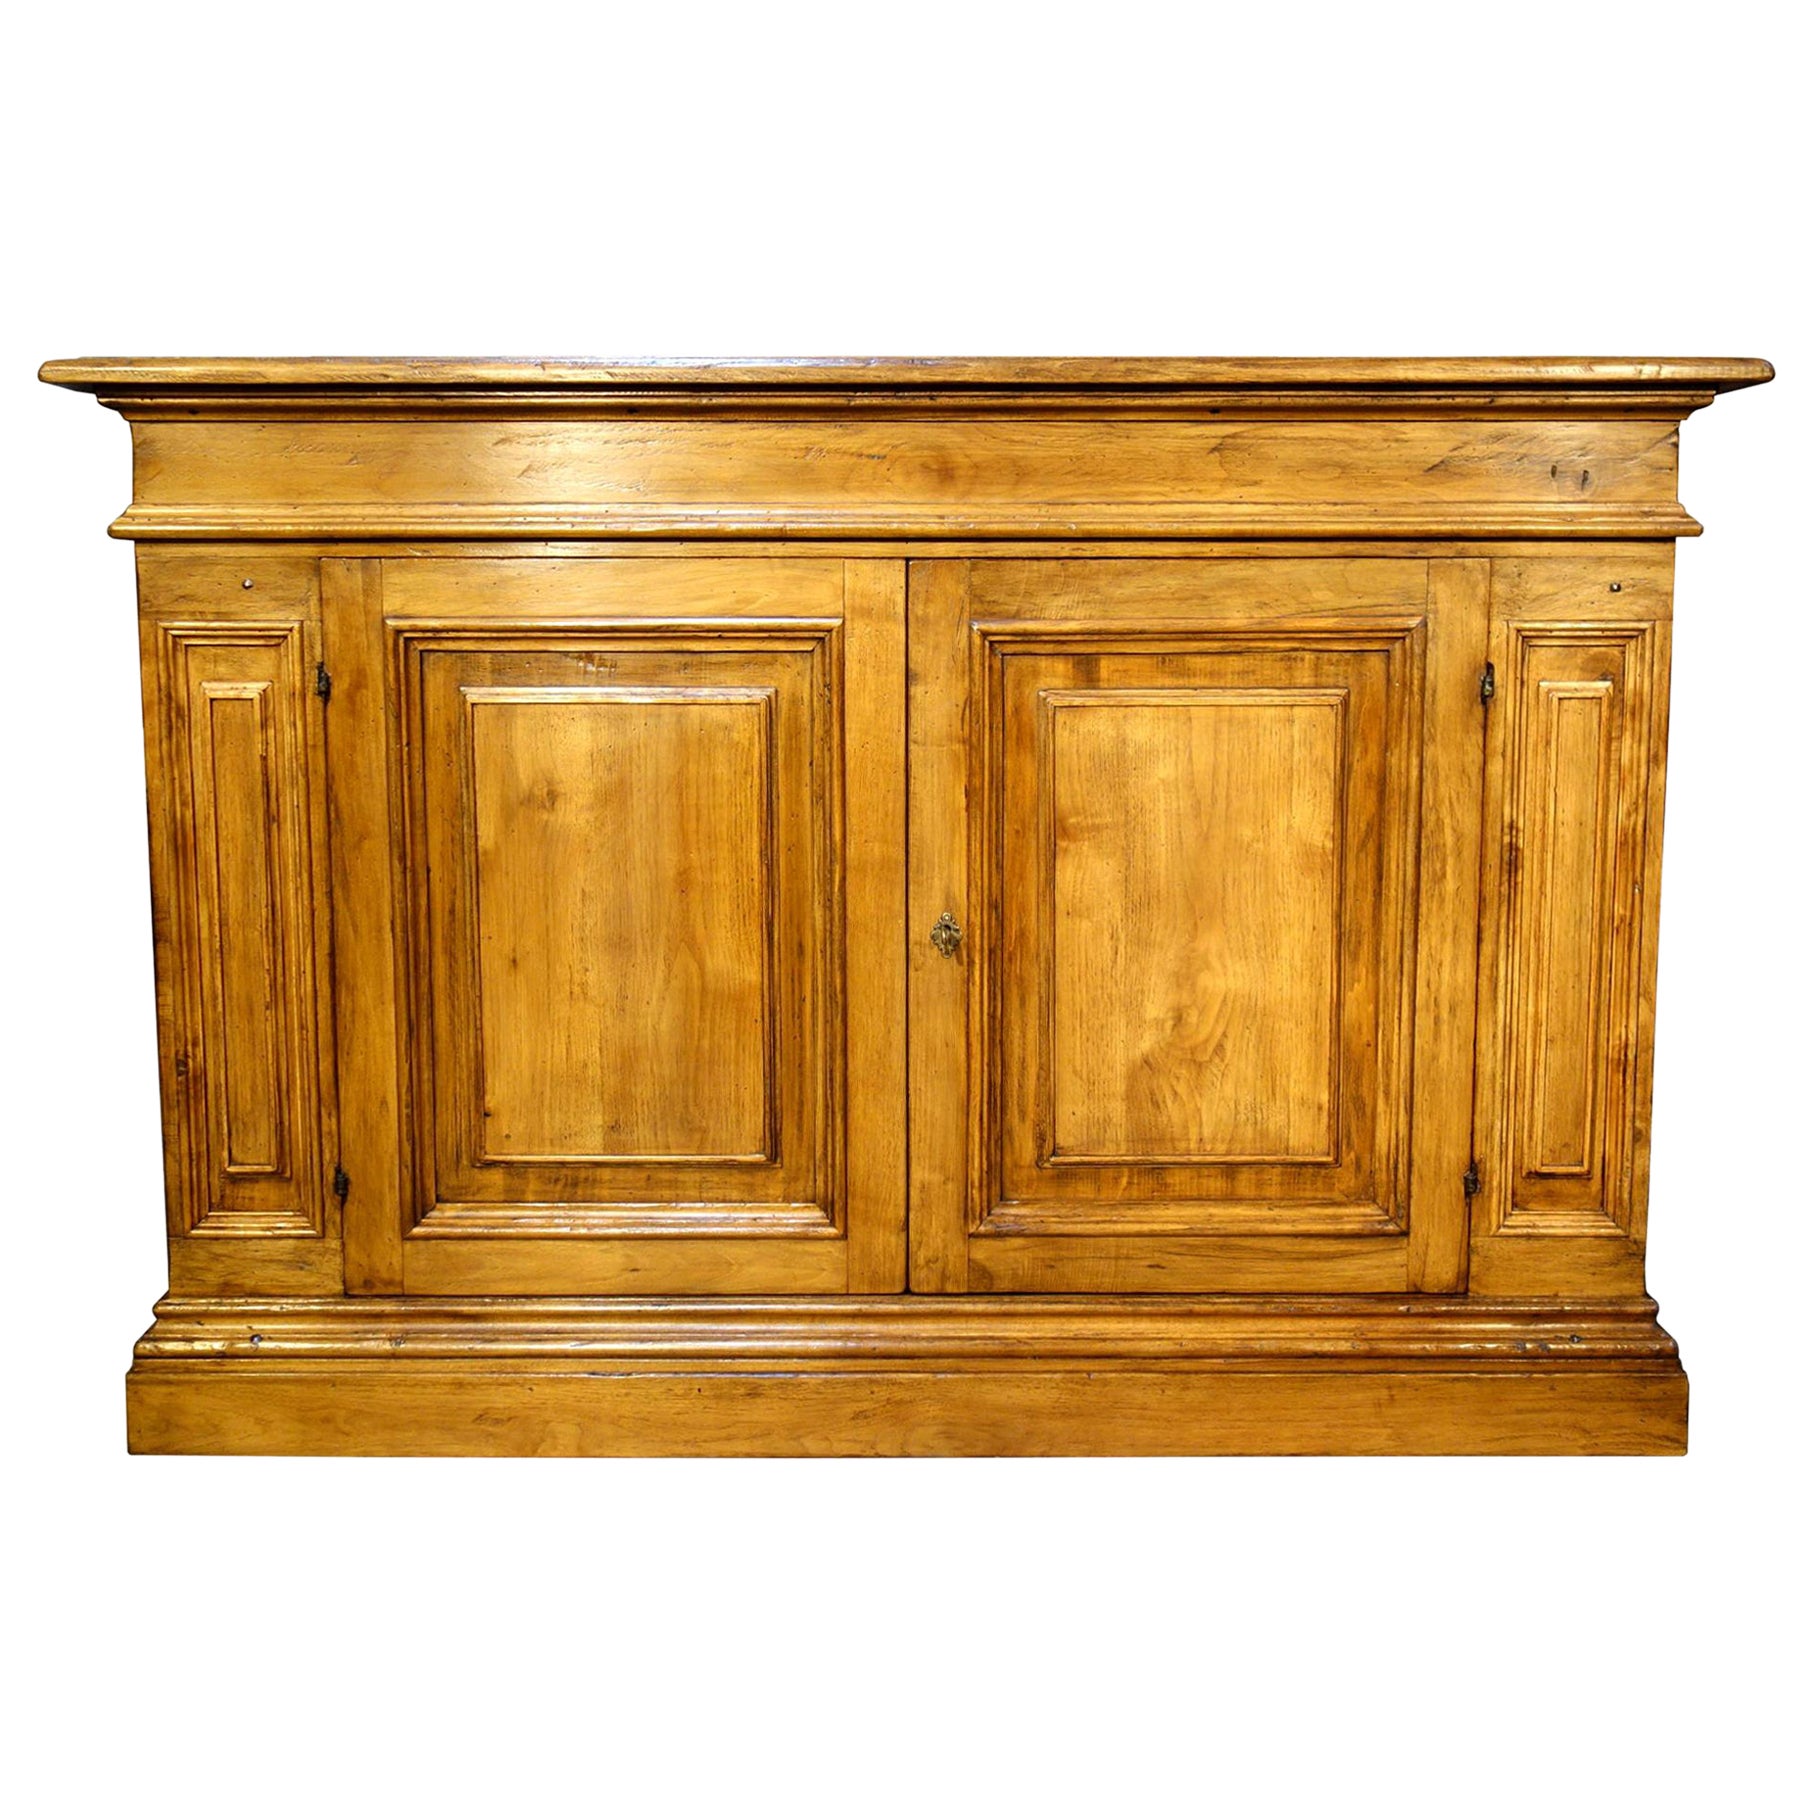 18th C Style ROMA Walnut Natural Finish Credenza Antique Reproduction In-Stock  For Sale